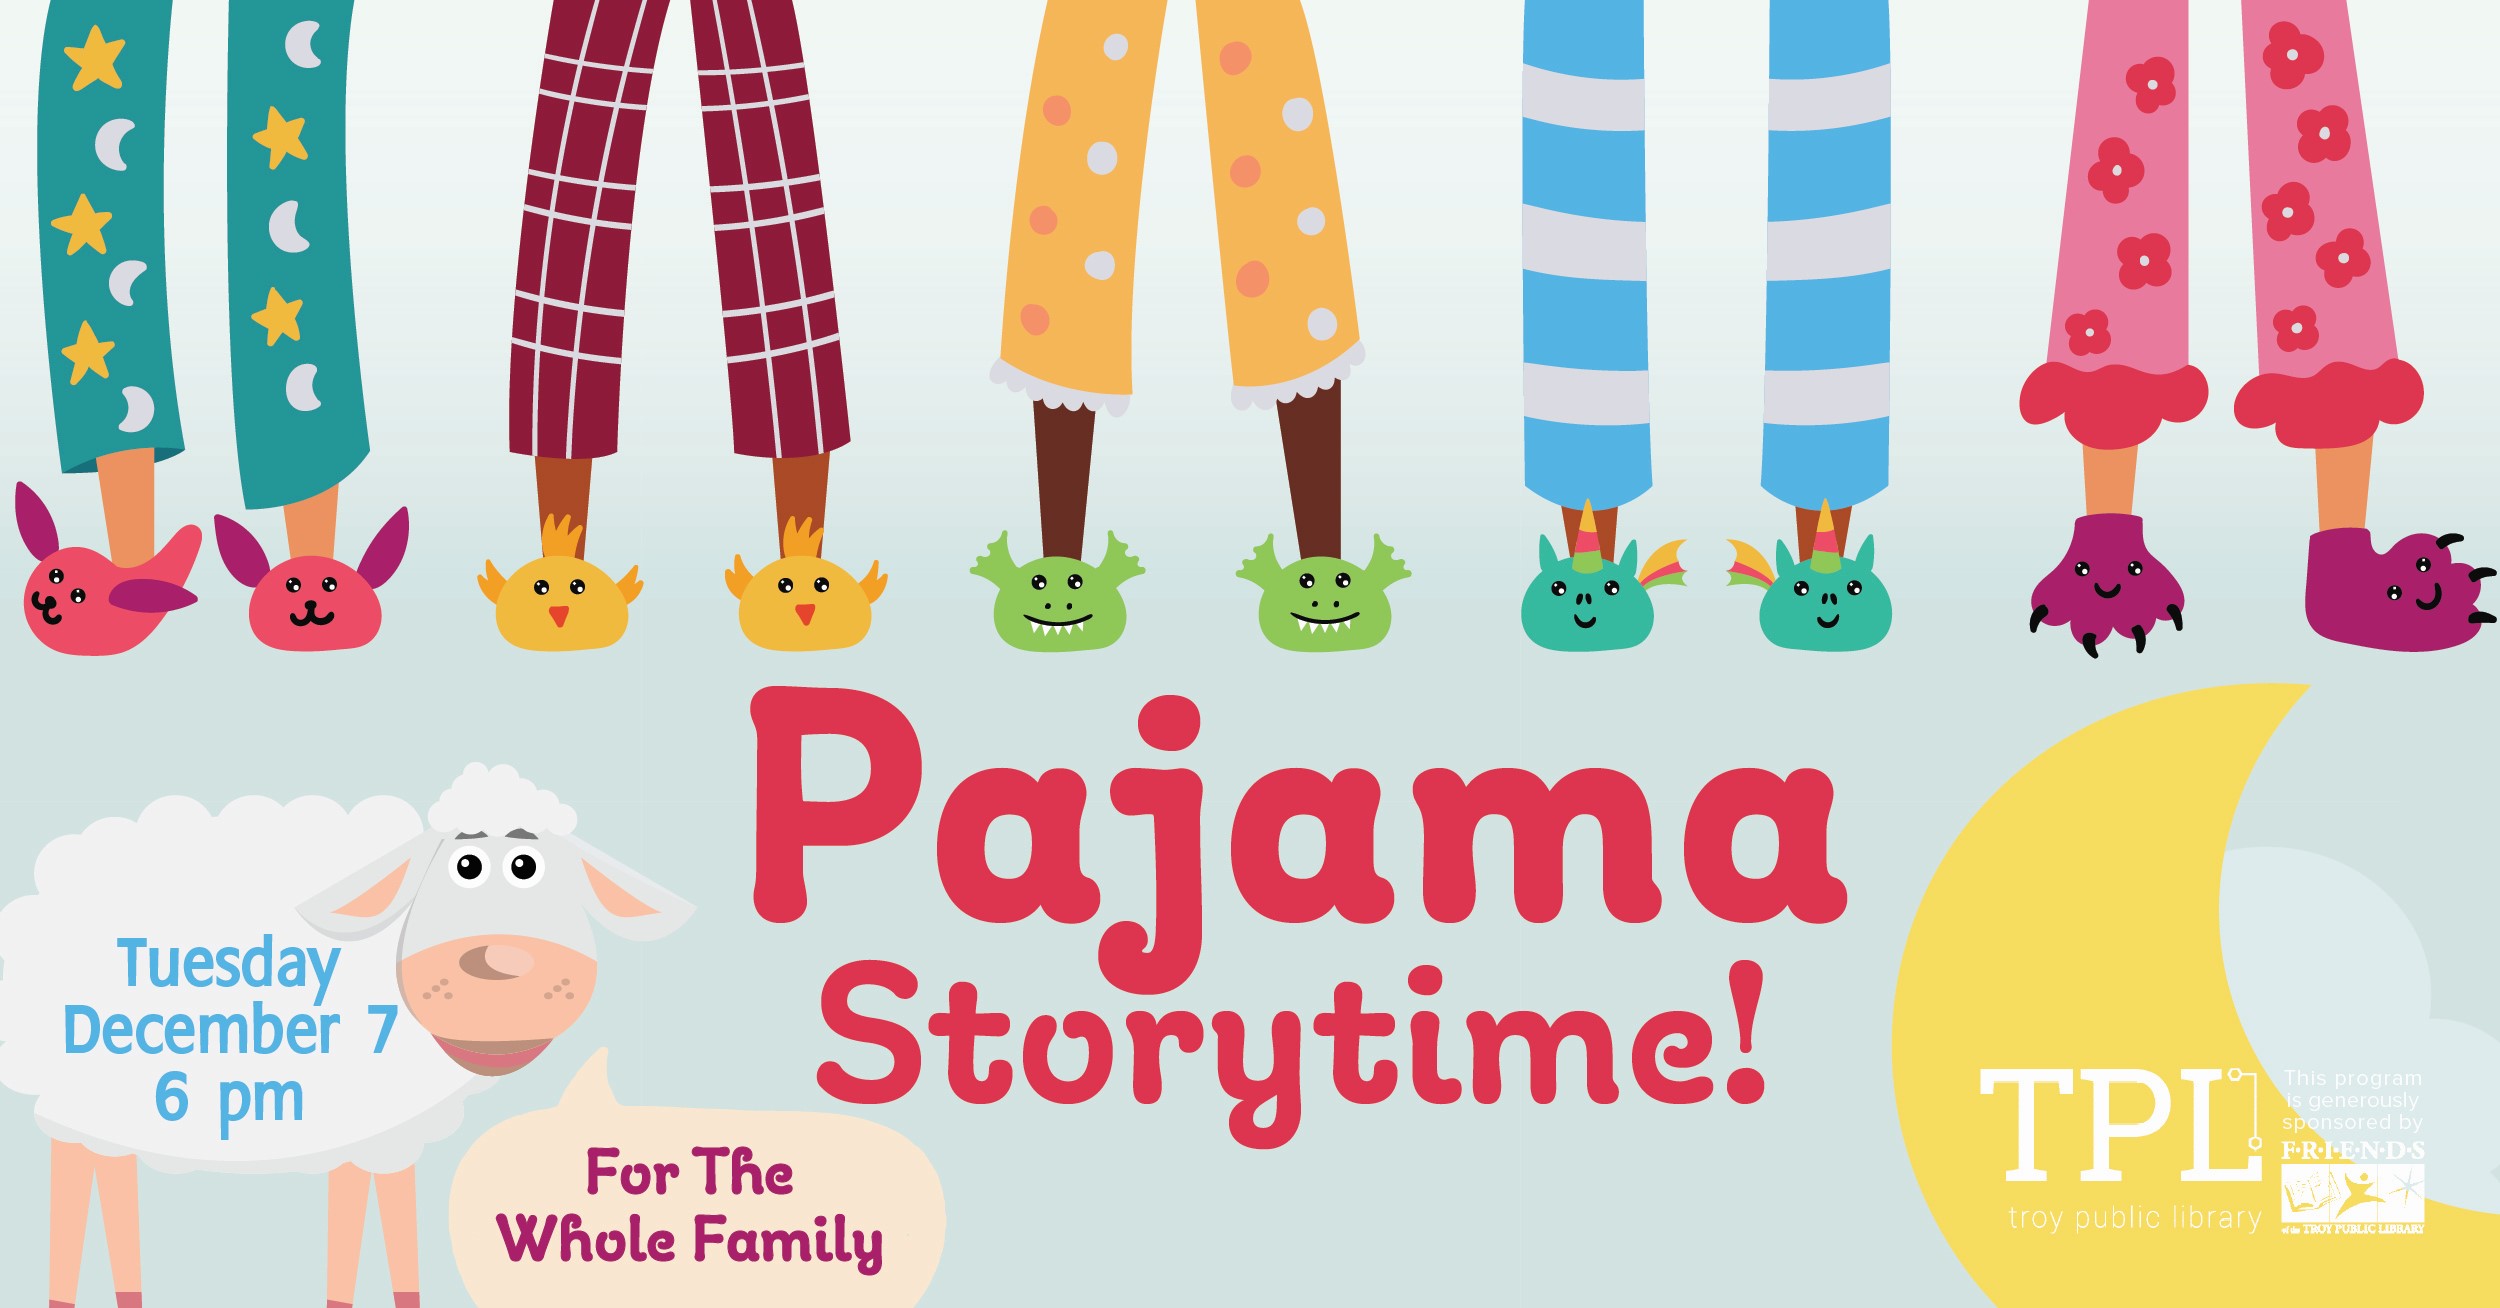 Pajama Storytime! Tuesday, December 7 at 6pm. For the Whole Family. Sponsored by the Friends of the Troy Public Library.